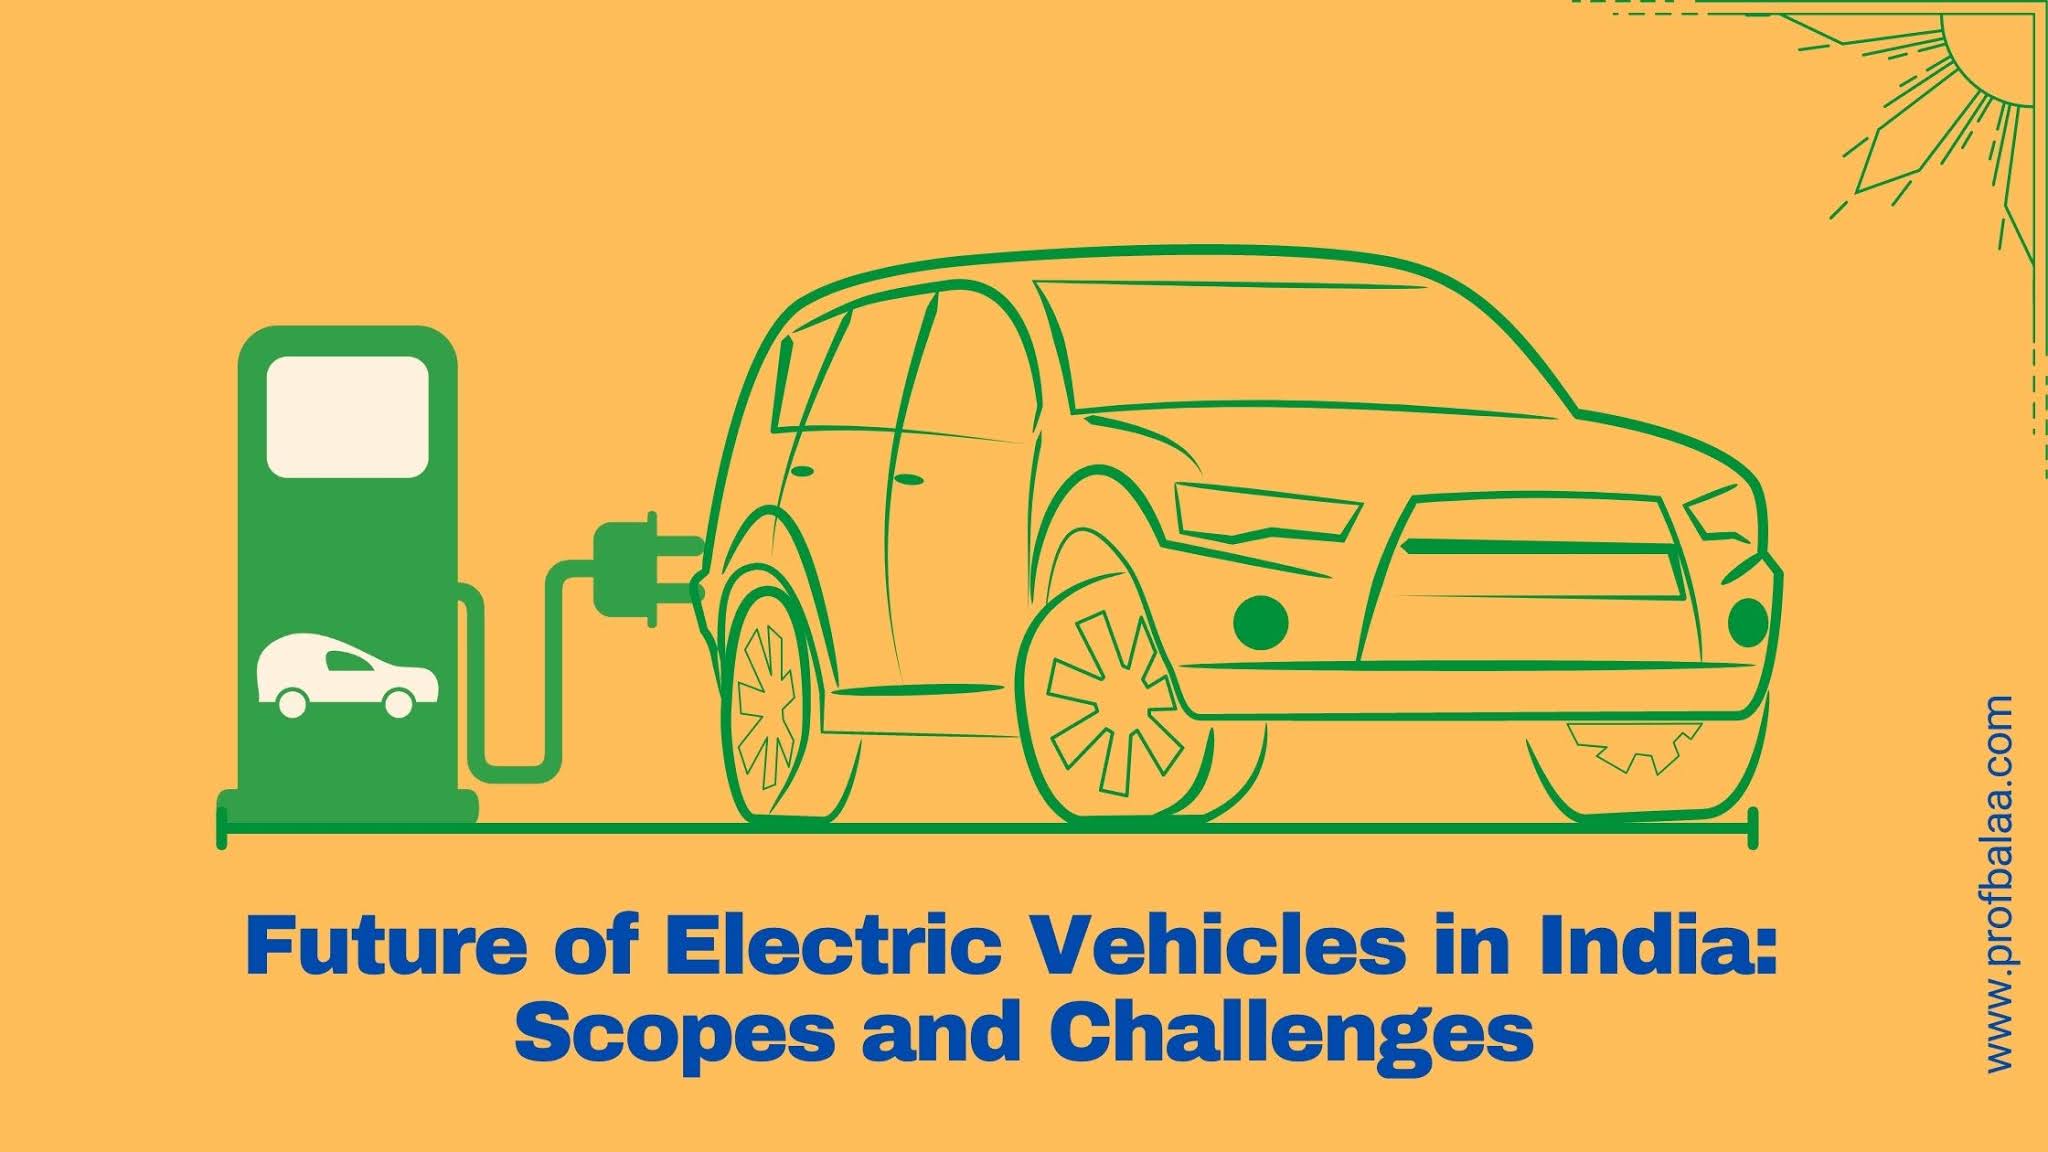 Future of Electric Vehicles in India: Scopes and Challenges